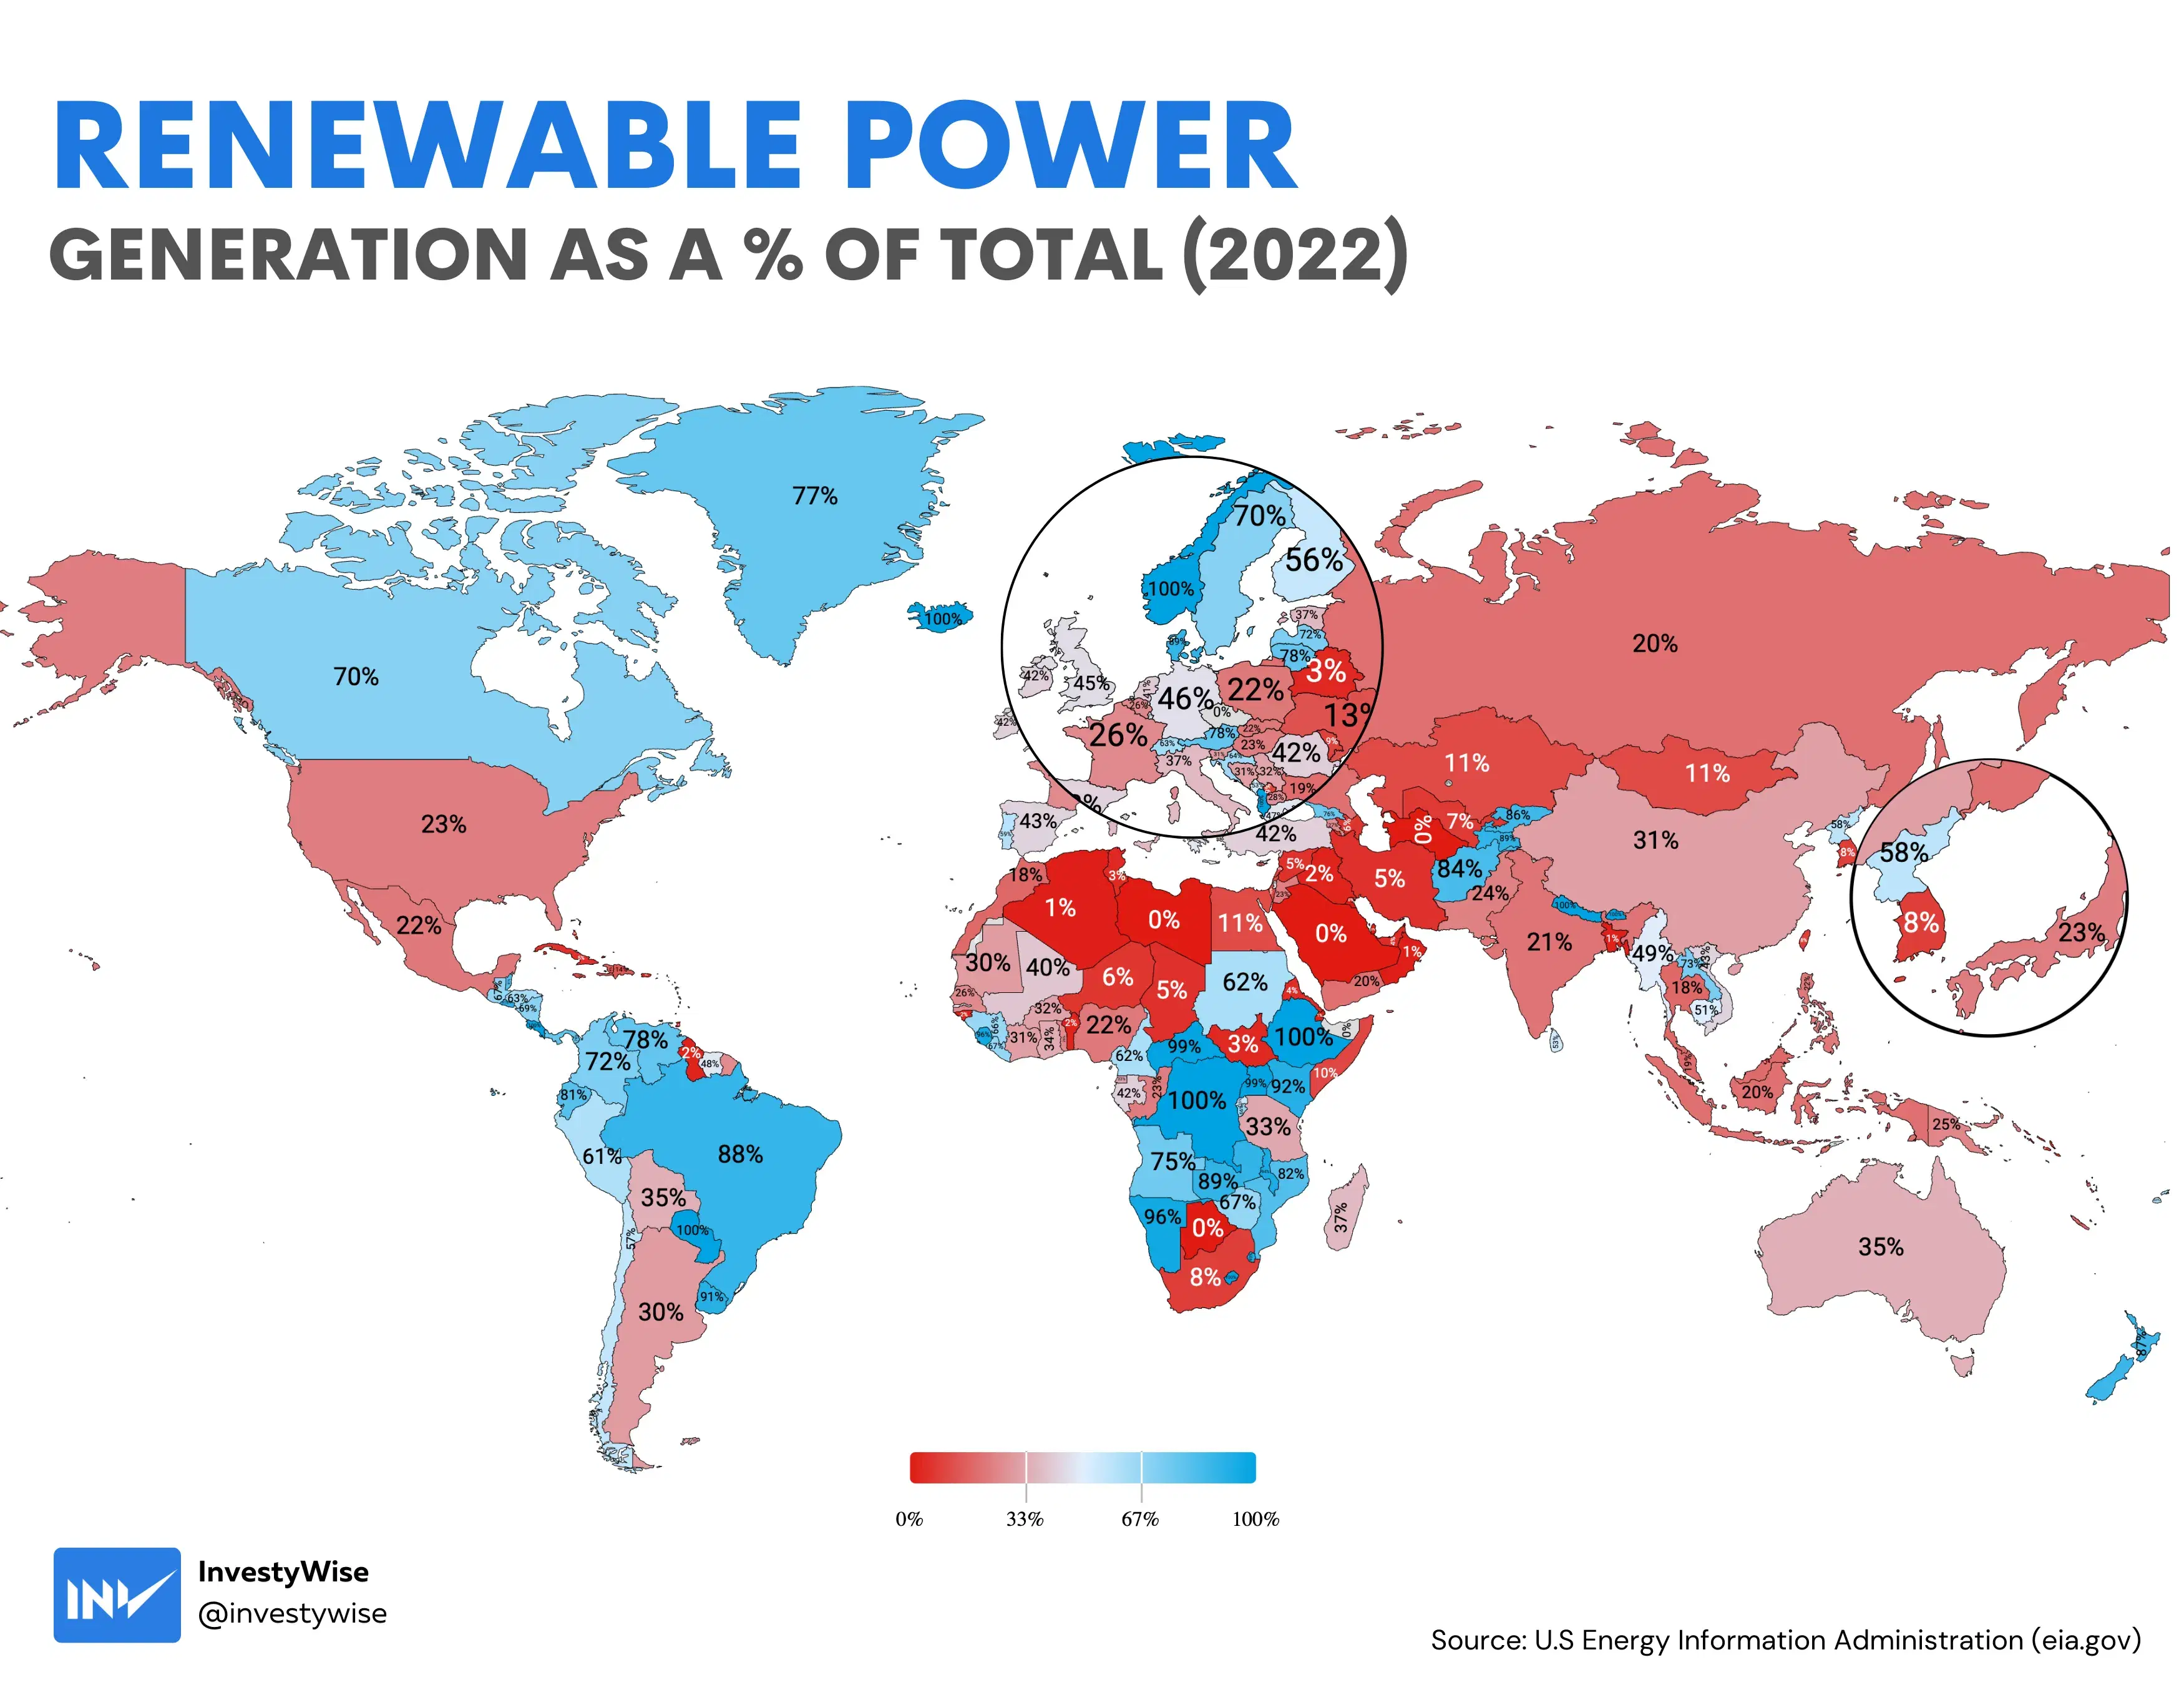 Renewable power generation as a percentage of total